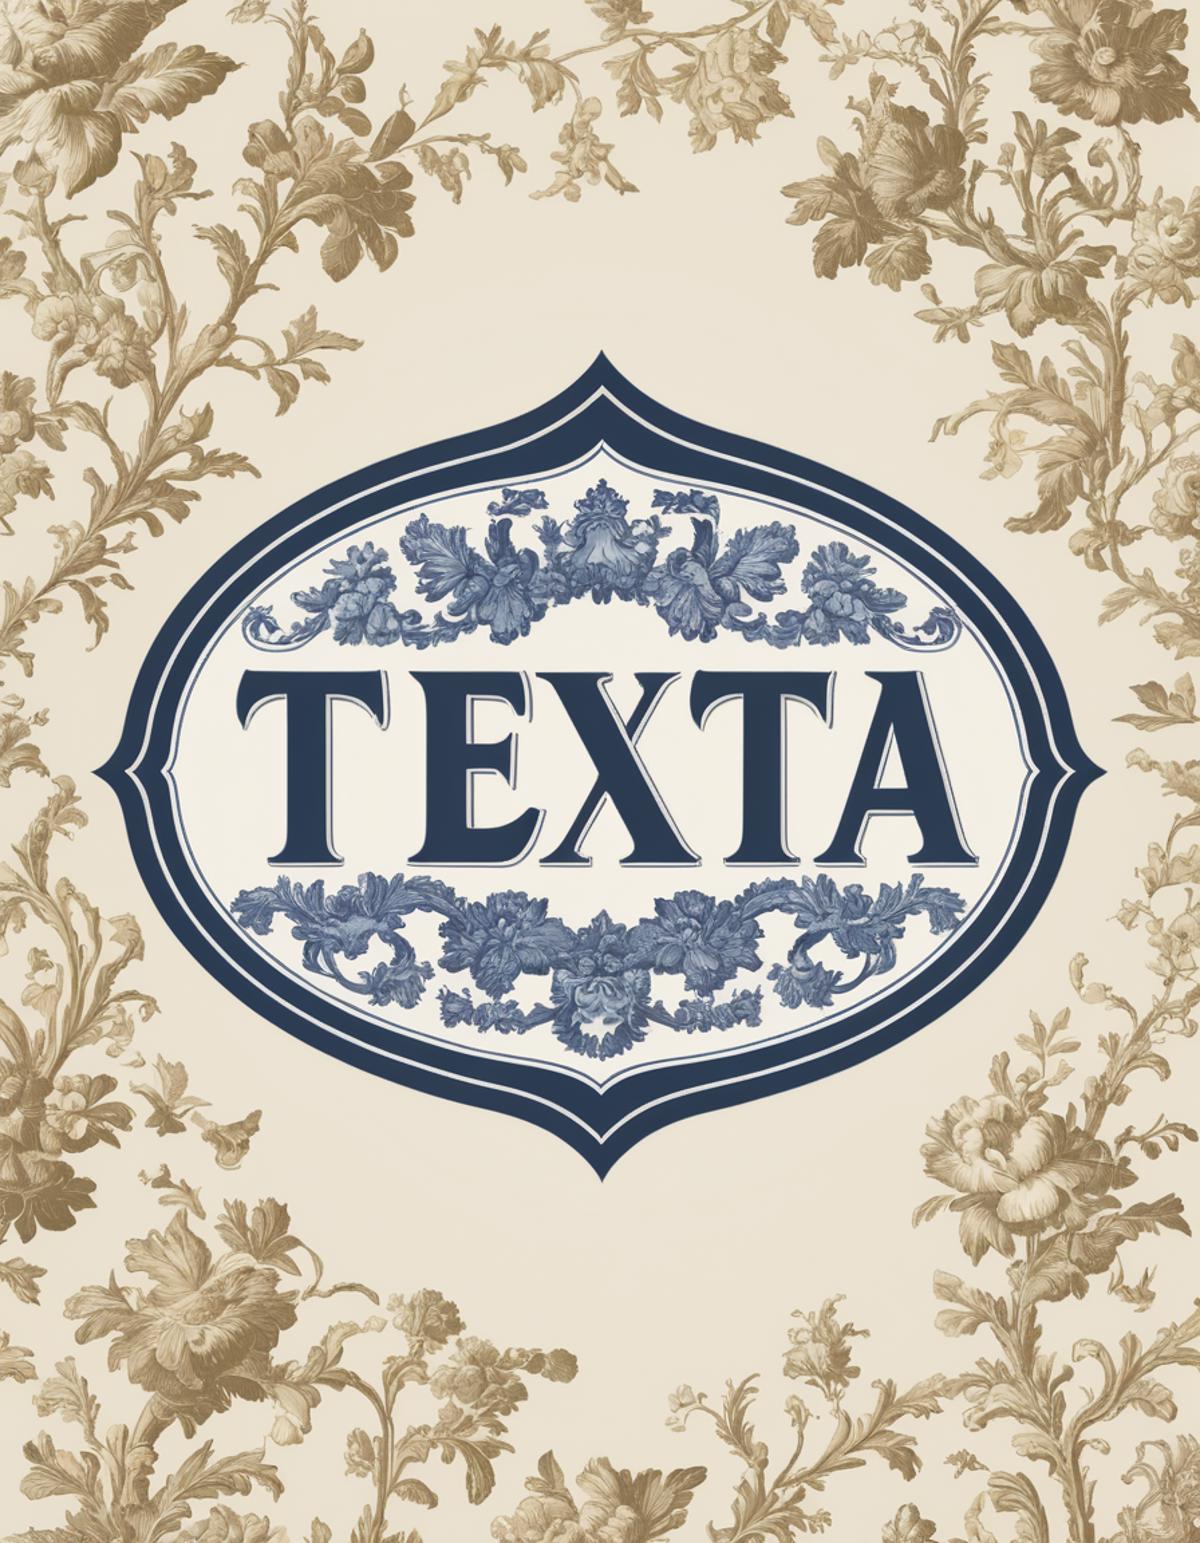 Texta - Generate text with SDXL image by humblemikey